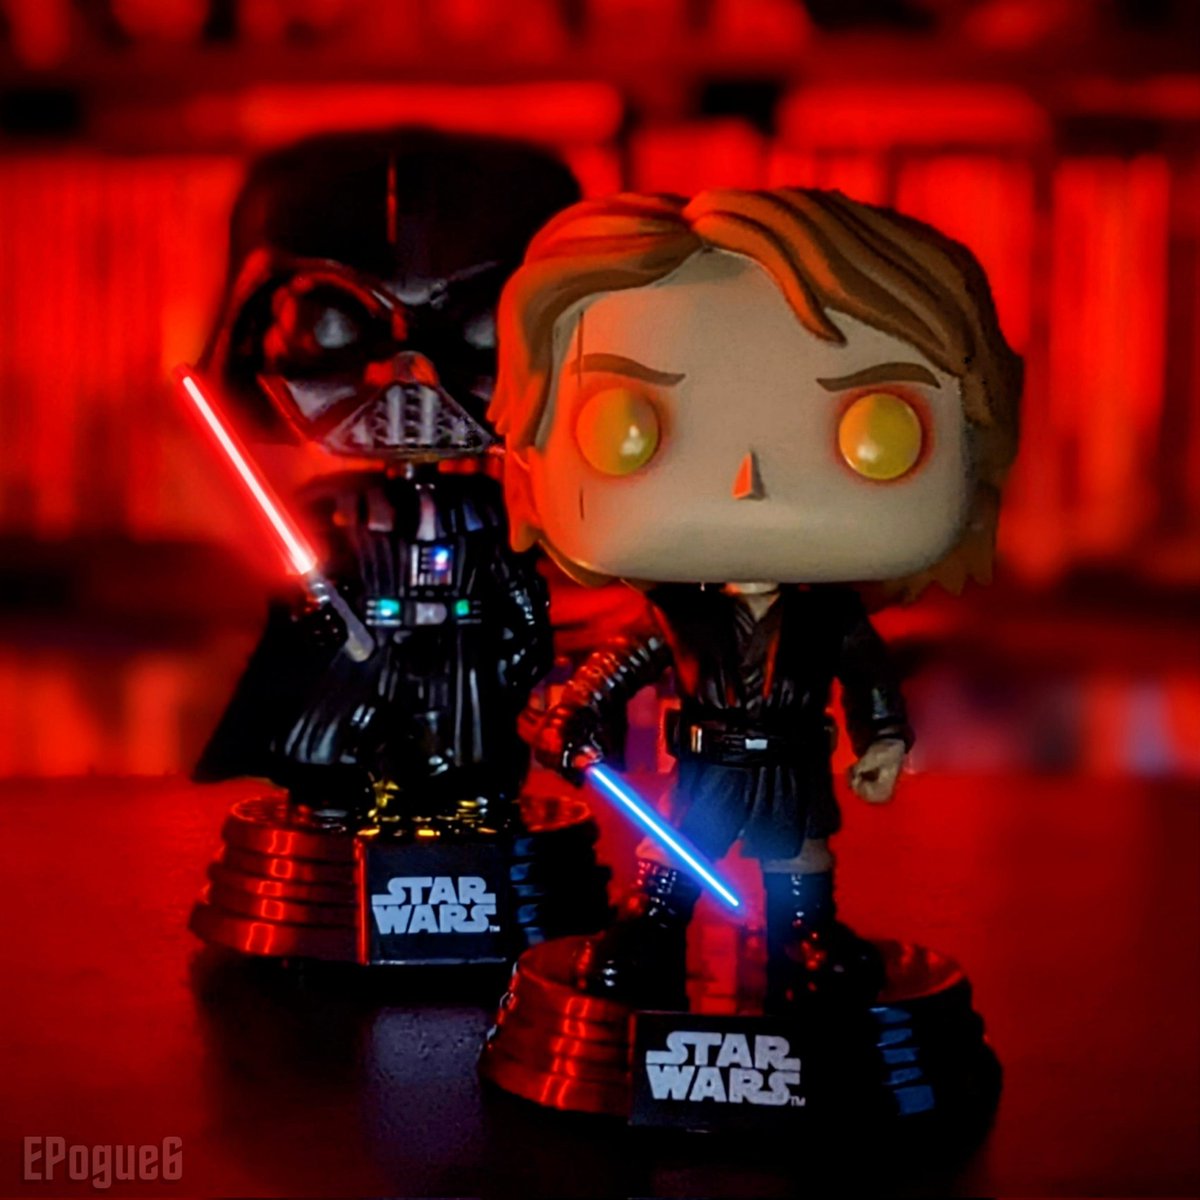 “You don’t know the power of the dark side! I must obey my master.” 
#PopTwinsTuesday